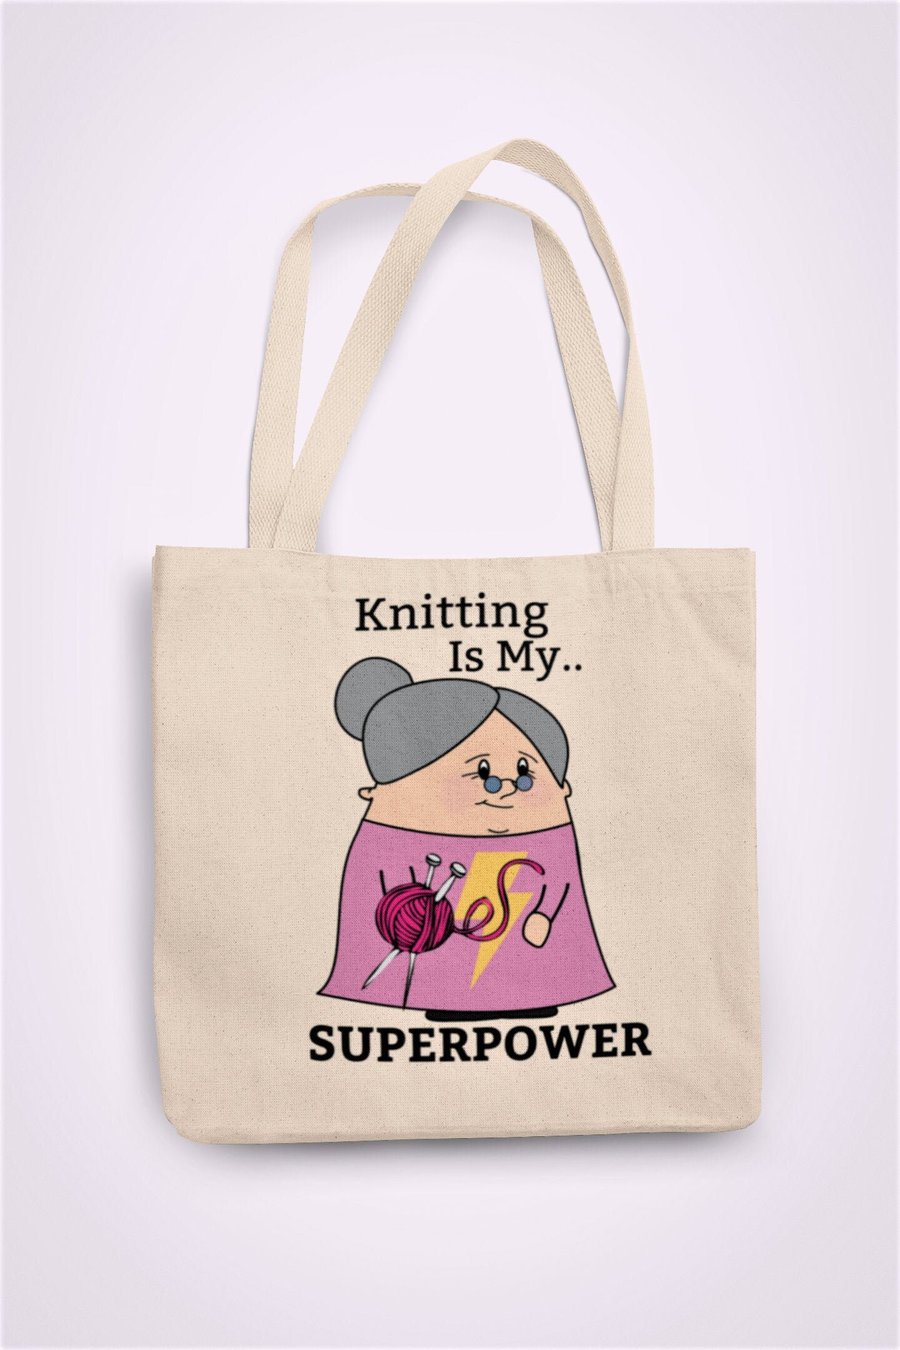 Knitting is my Superpower Tote Bag Reusable Cotton bag - funny birthday present 